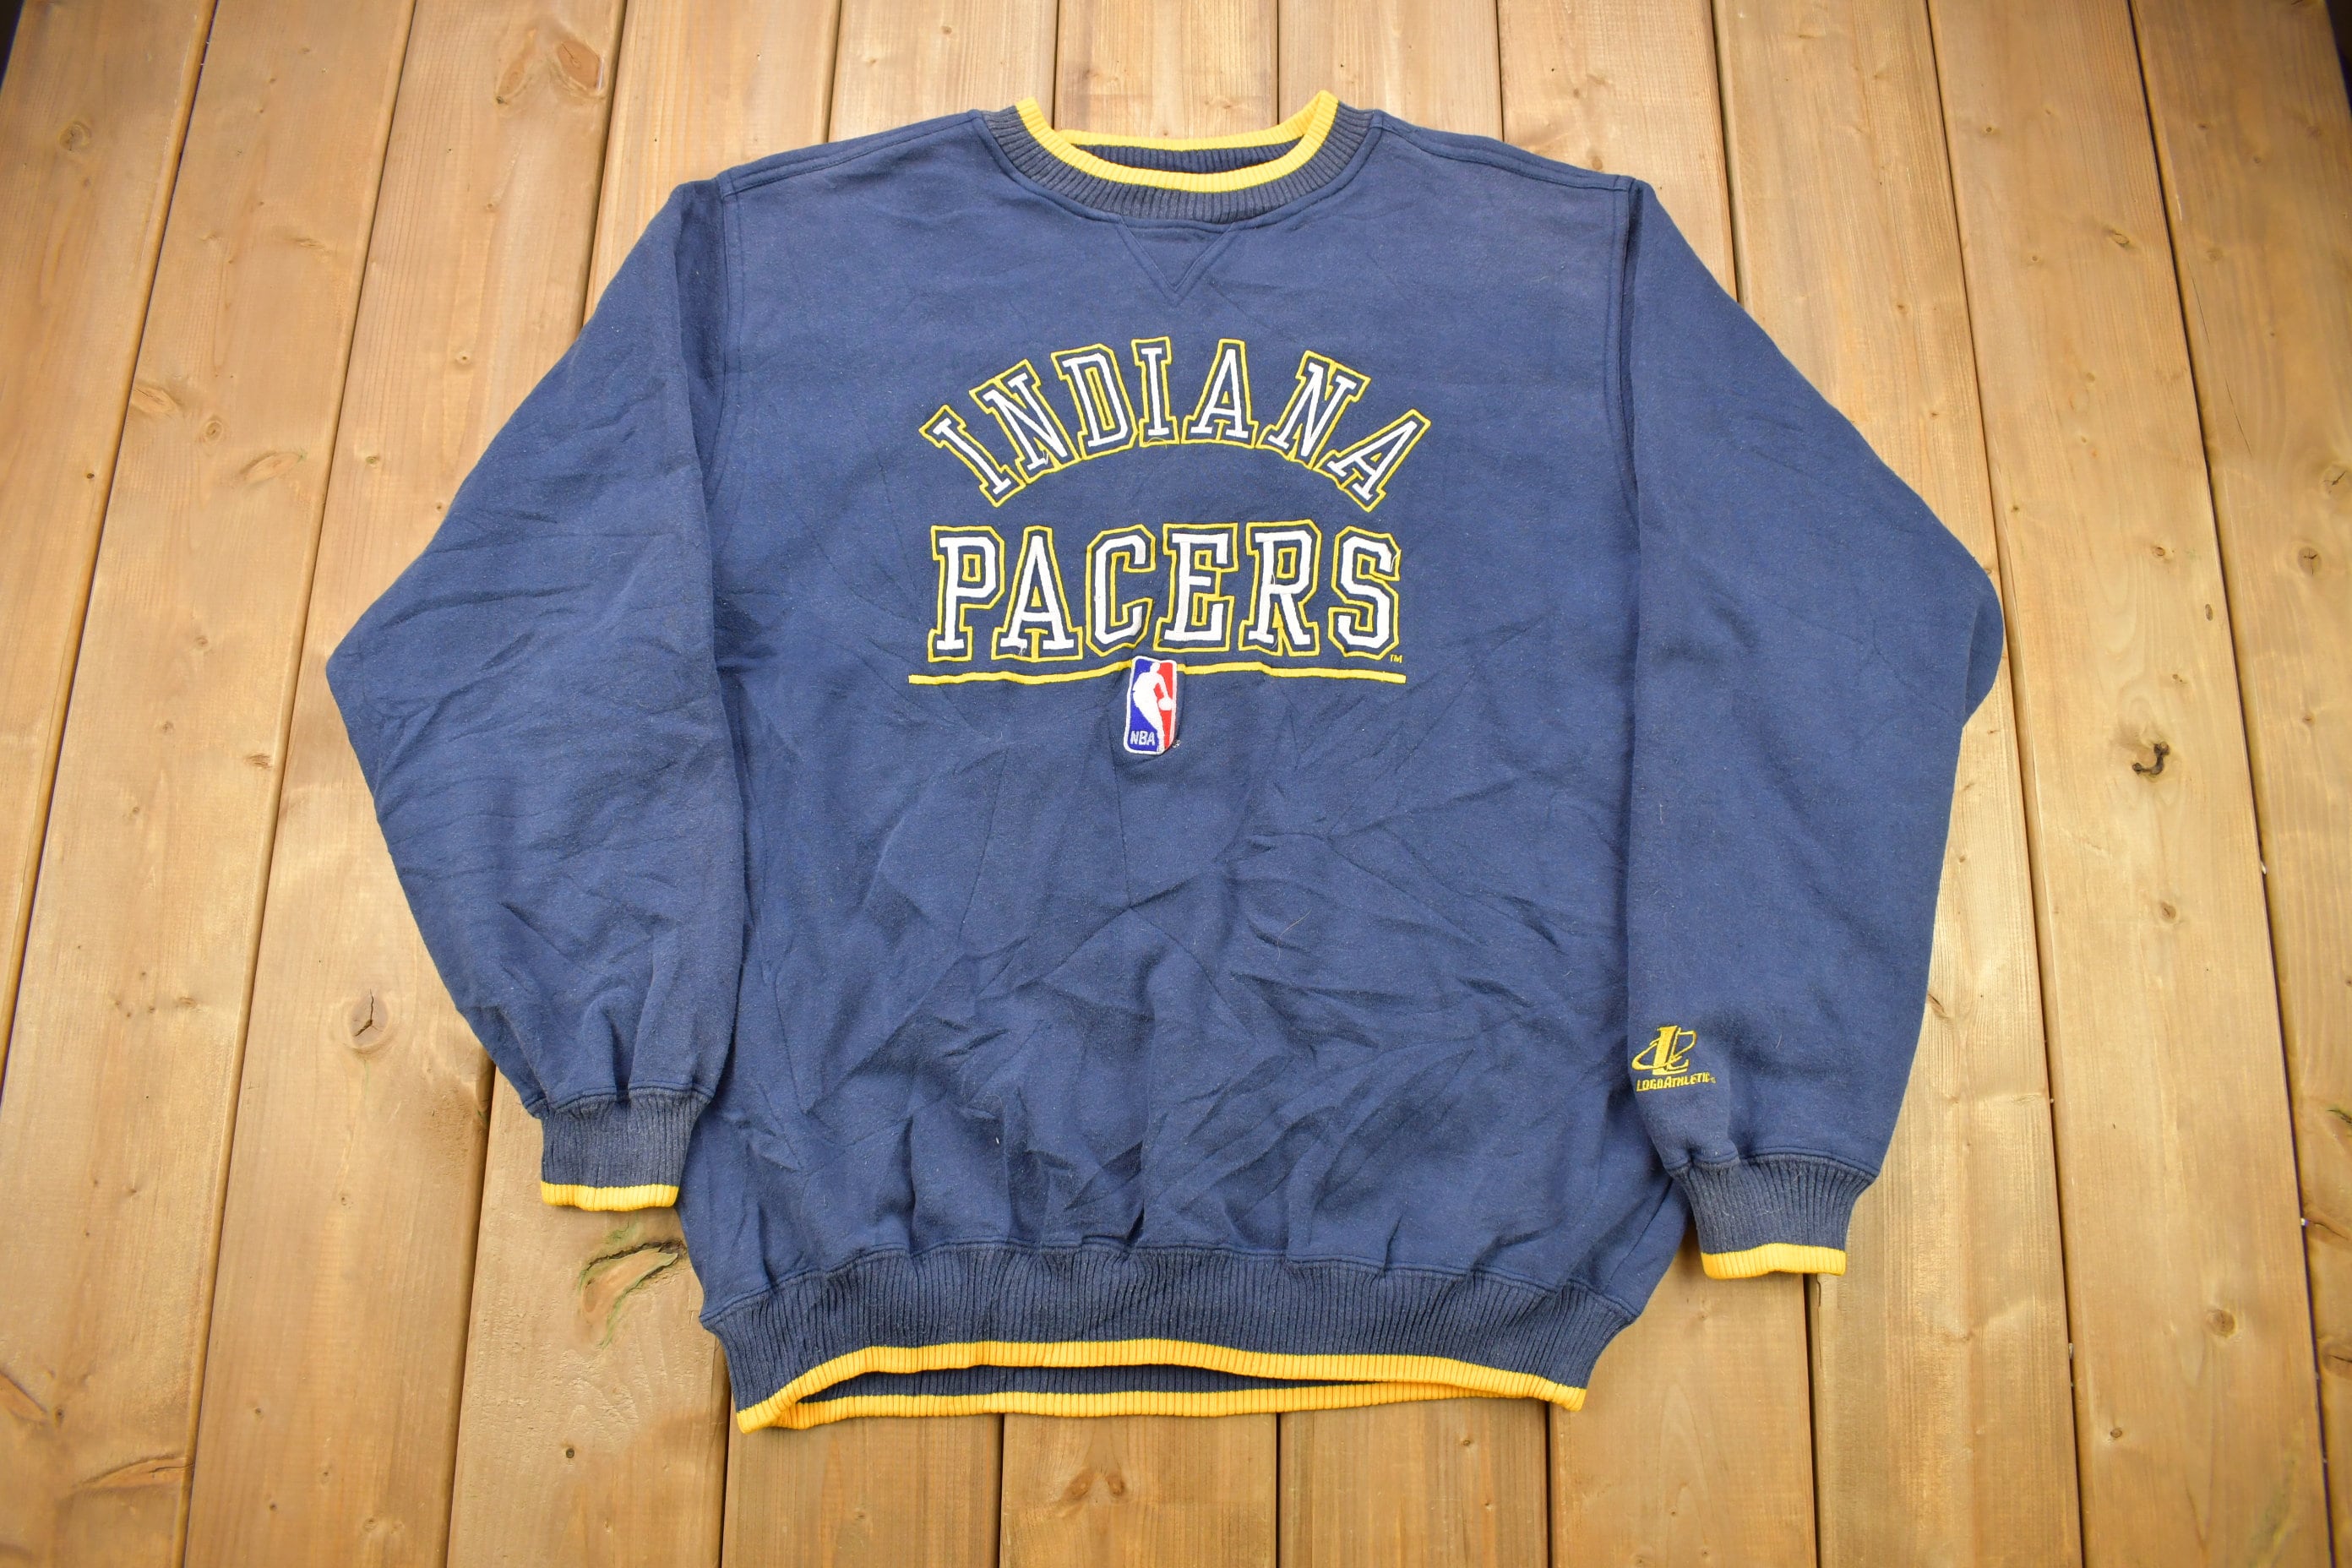 Retro Indiana Pacers Vintage Essential T-Shirt for Sale by van